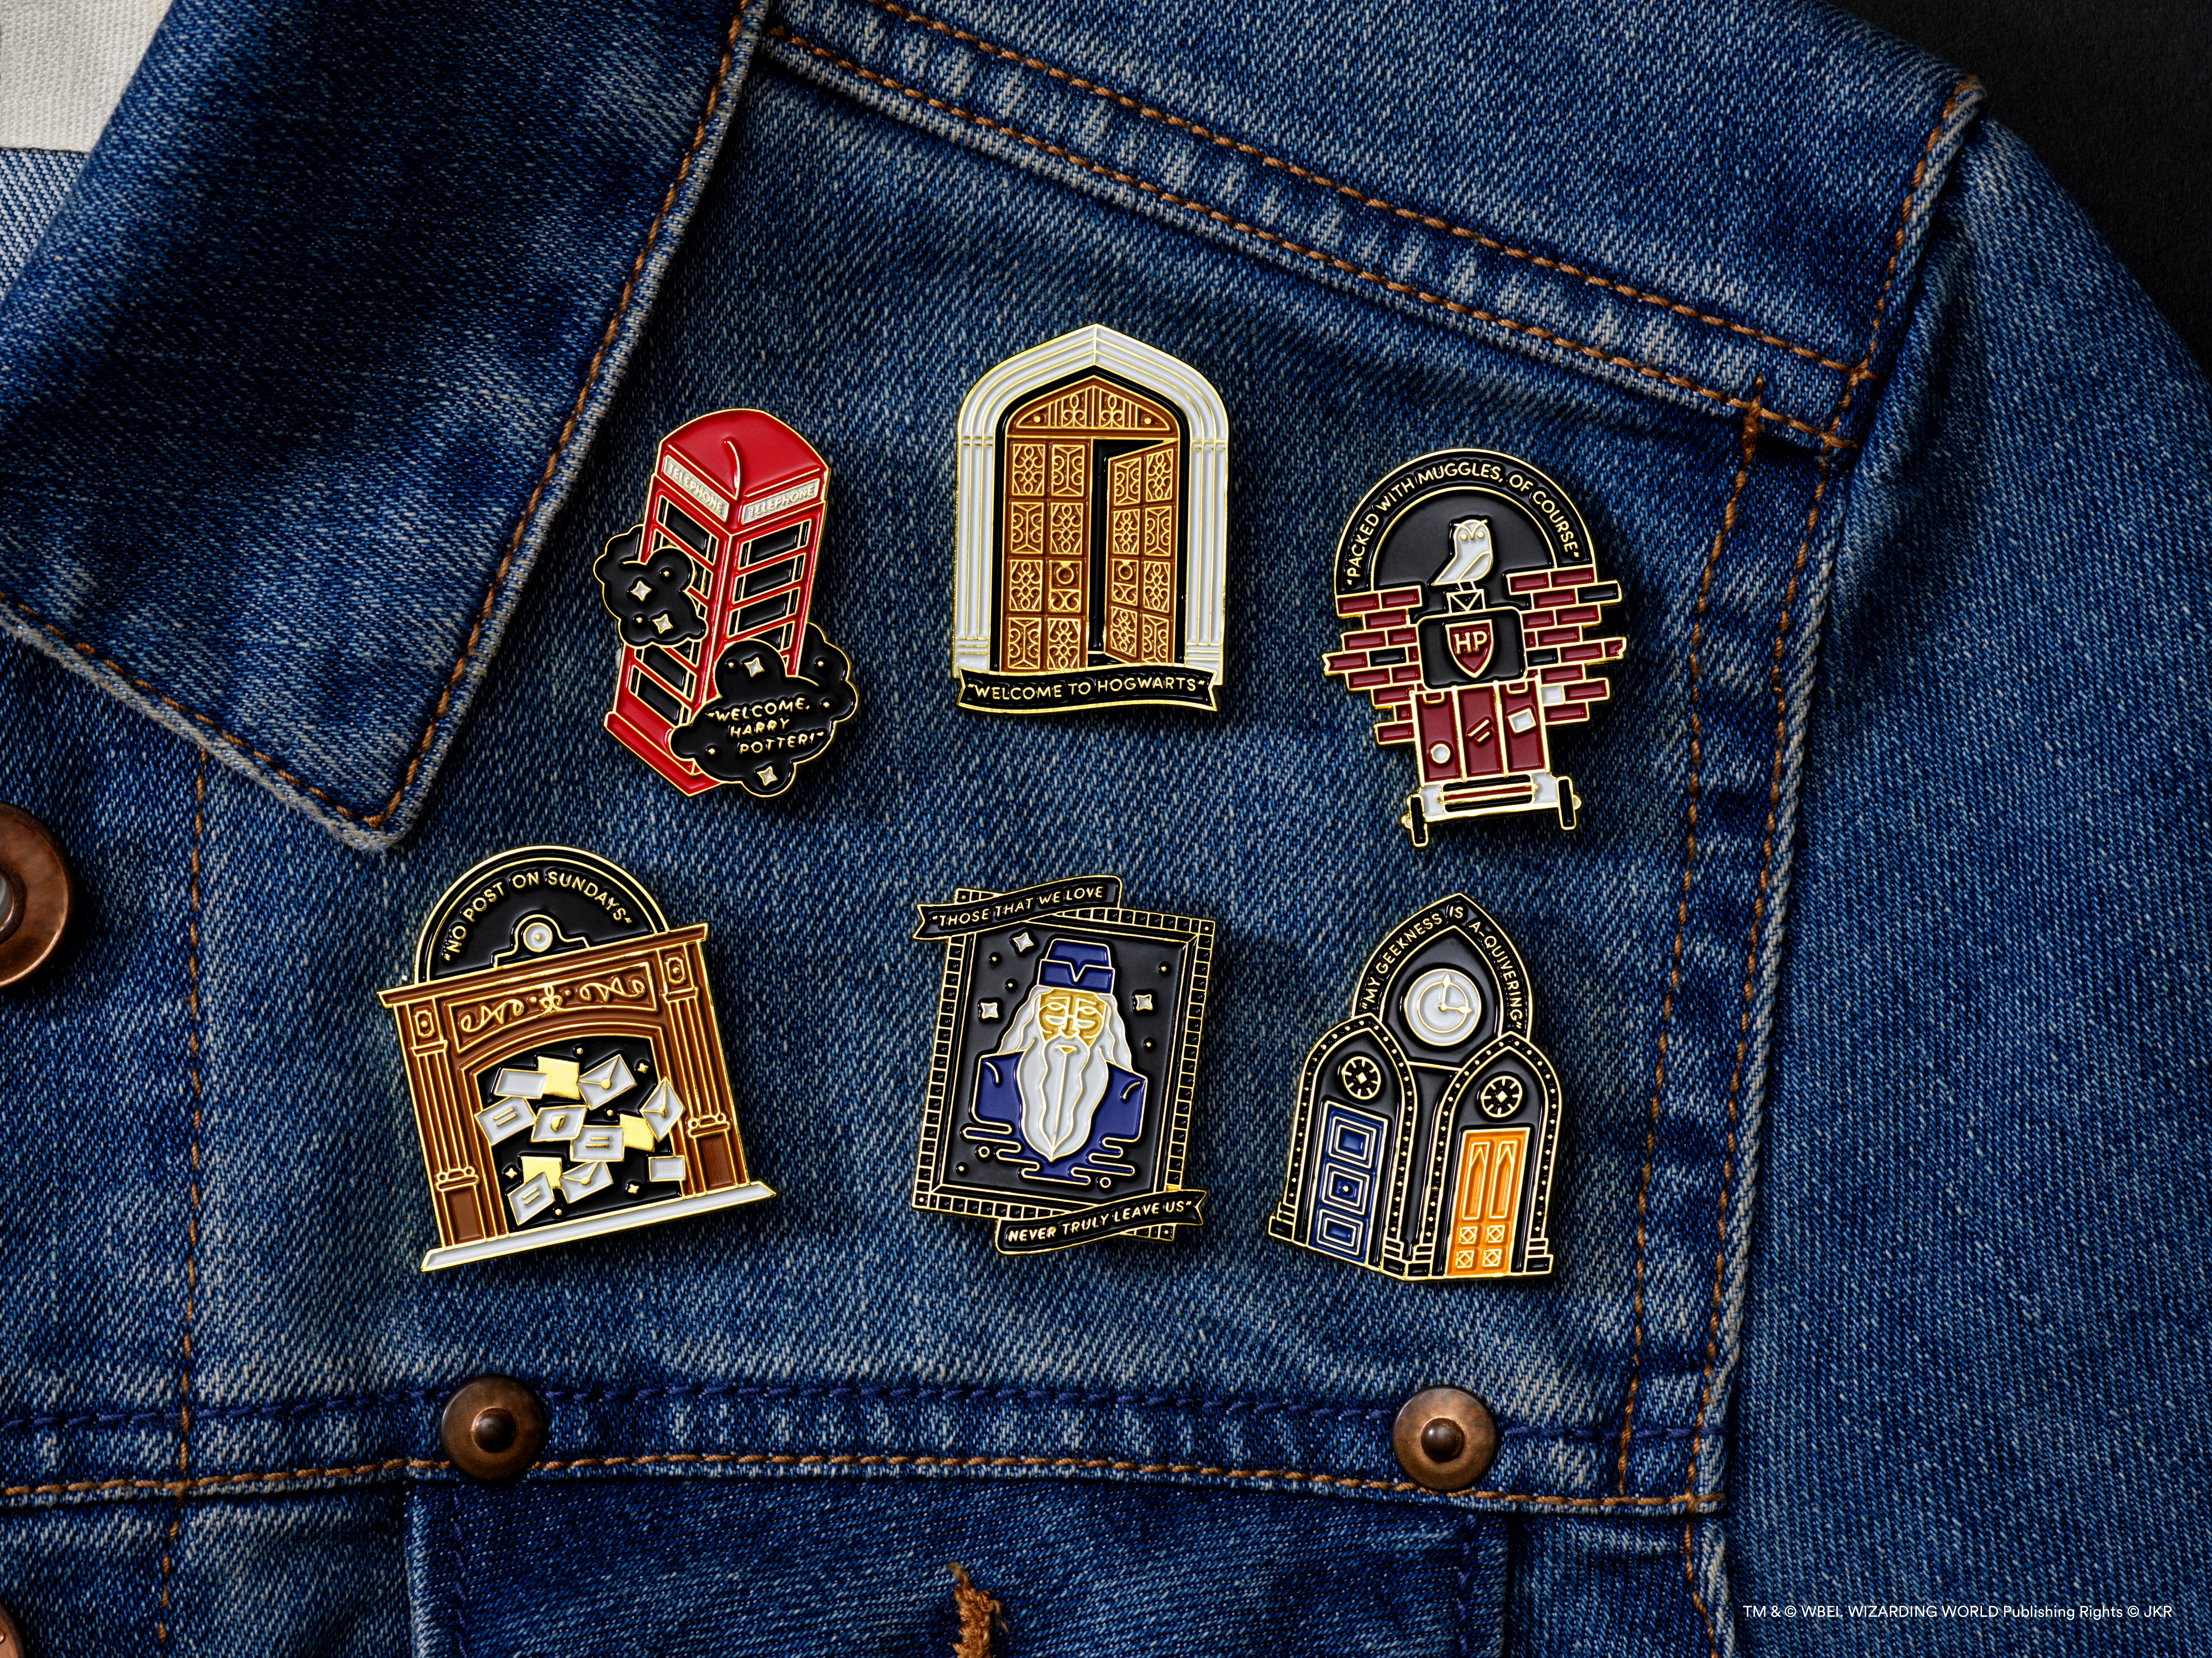 Collectible pins will be available to Wizarding World Gold members.